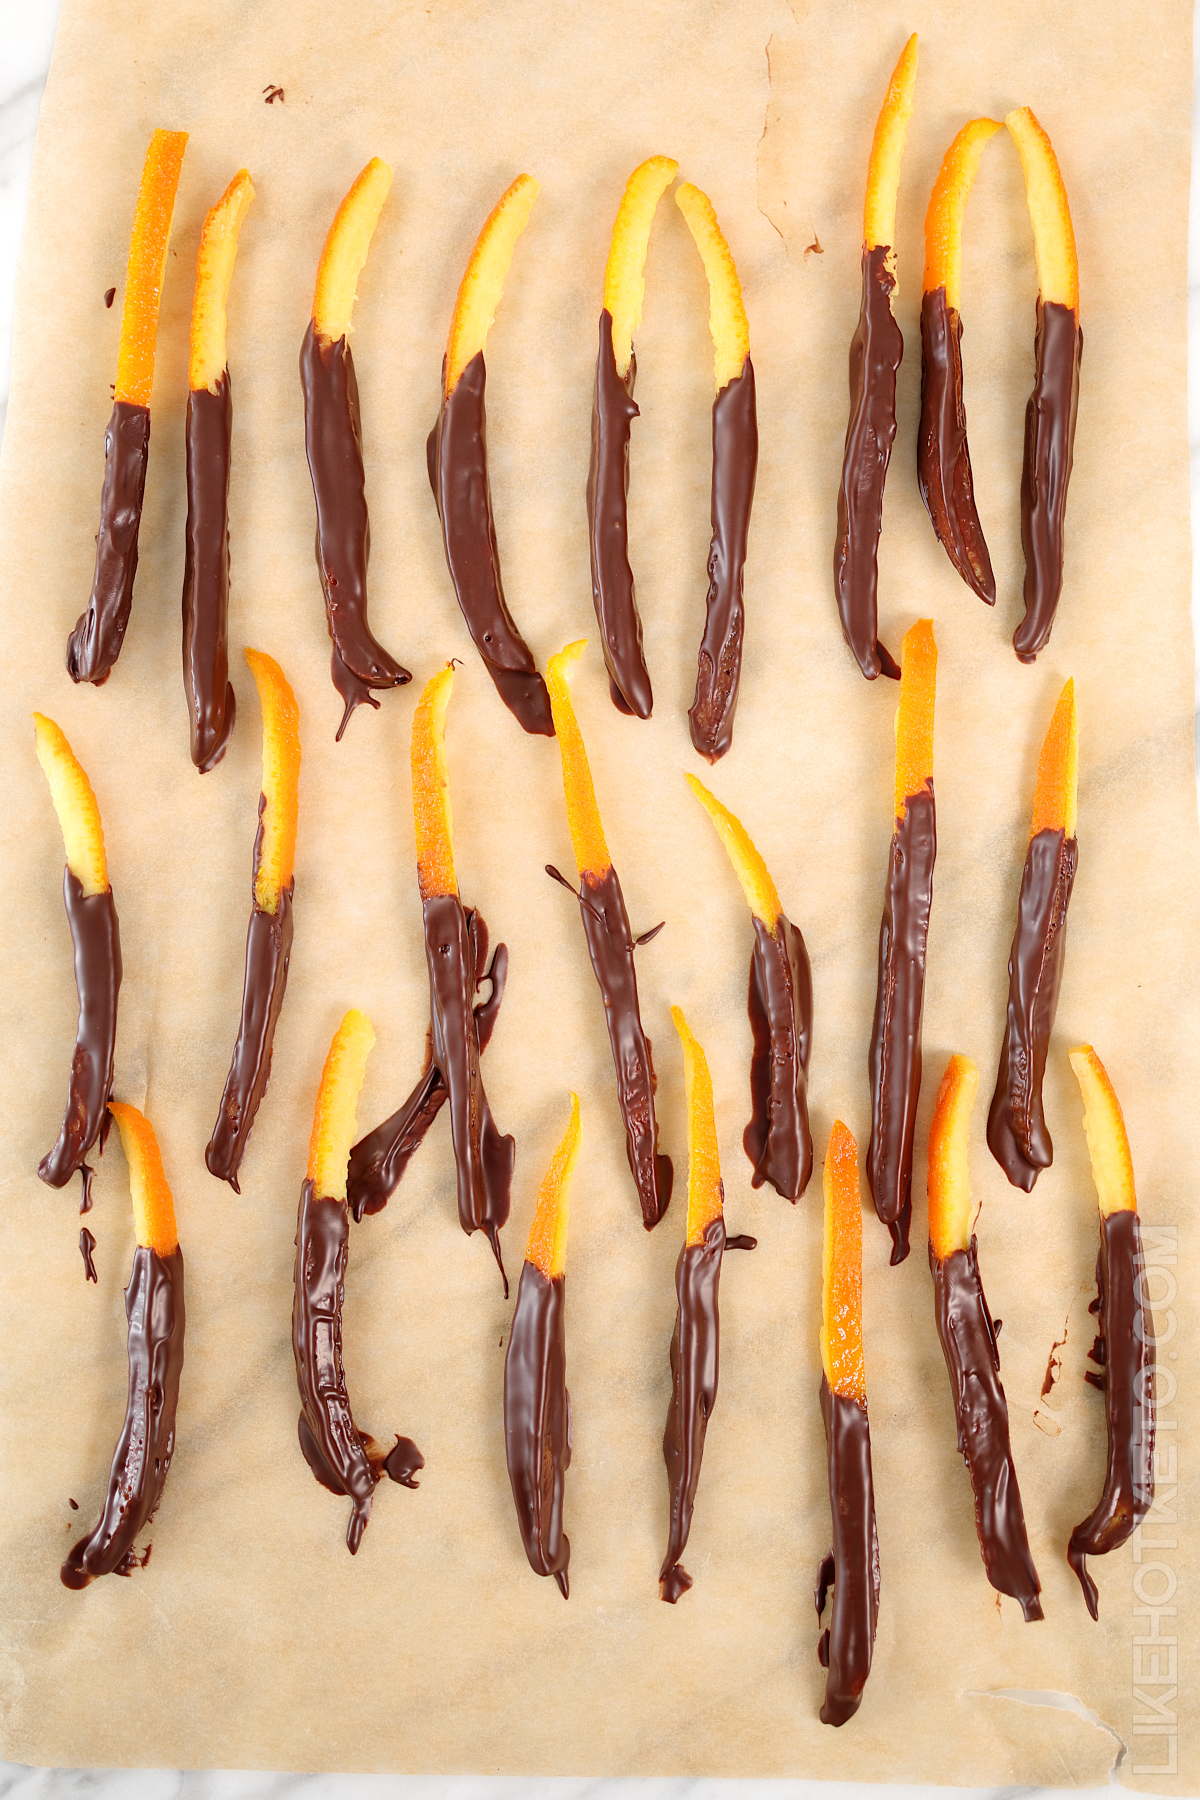 Keto candied orange peels freshly dipped in melted chocolate spread on a parchment paper to set.